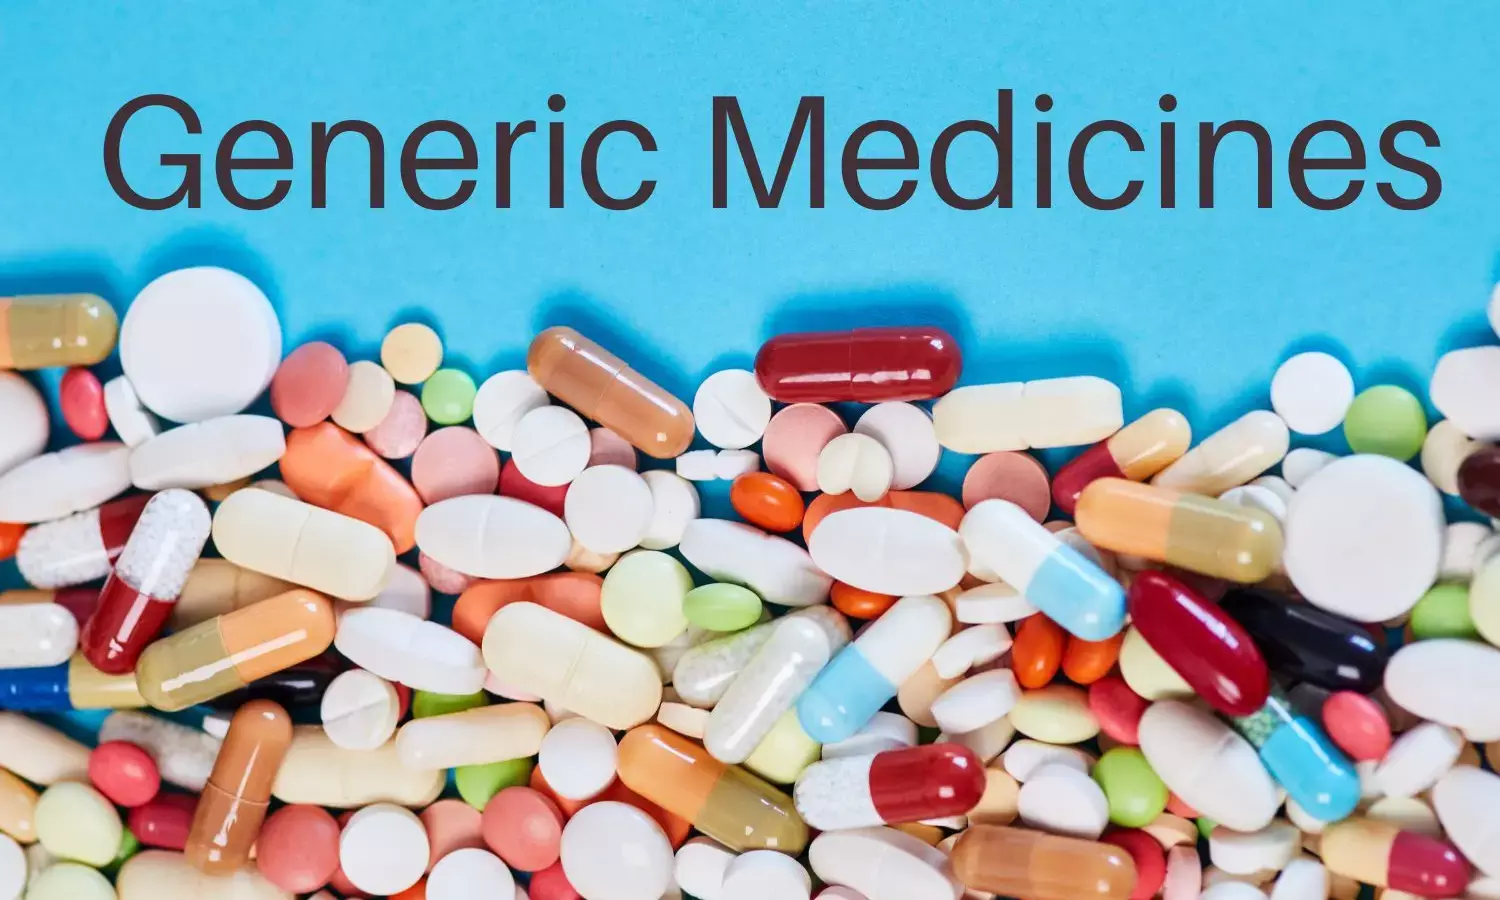 Disciplinary Action against Doctors over failure to prescribe generic  medicines: Supreme Court seeks response from Centre, NMC